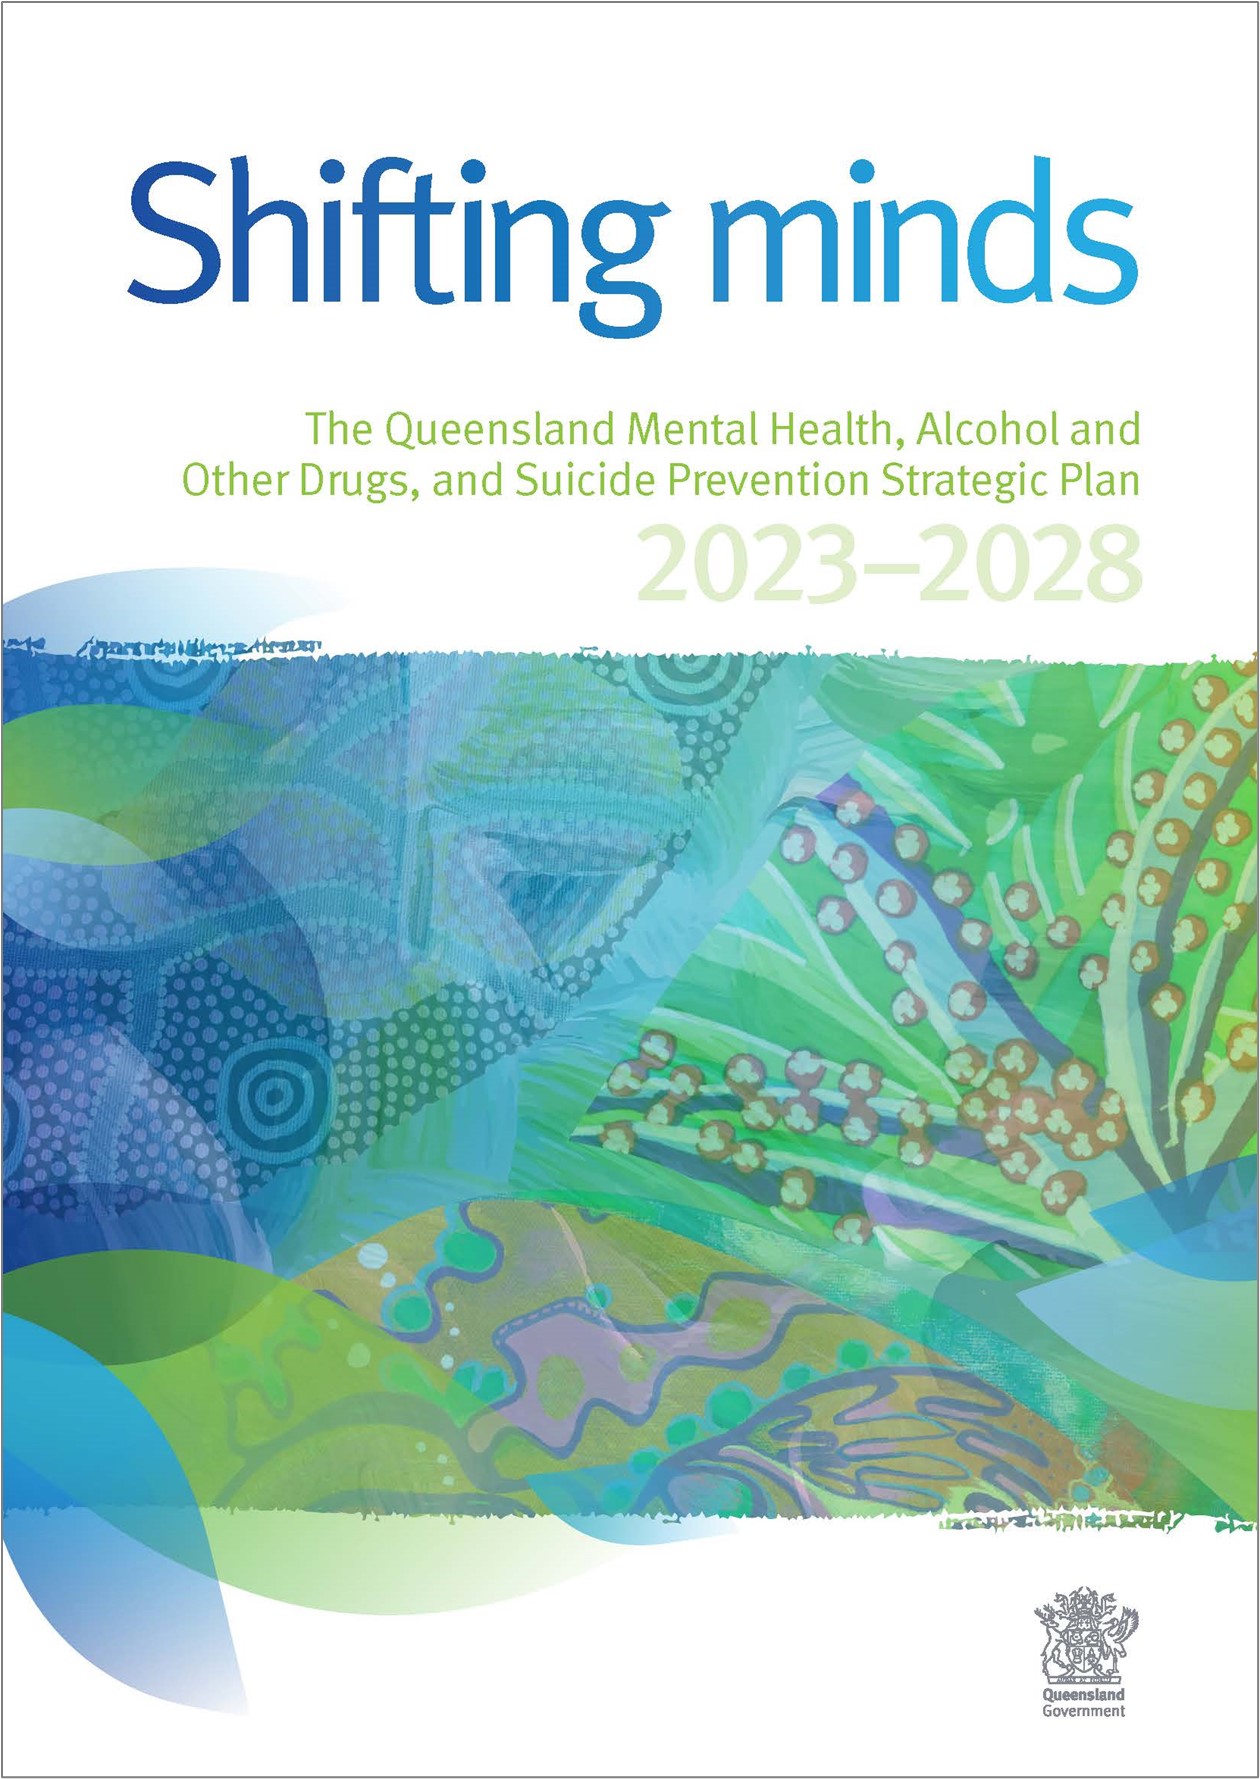 Shifting minds_ The Queensland Mental Health, Alcohol and Other Drugs, and Suicide Prevention Strategic Plan 2023–2028